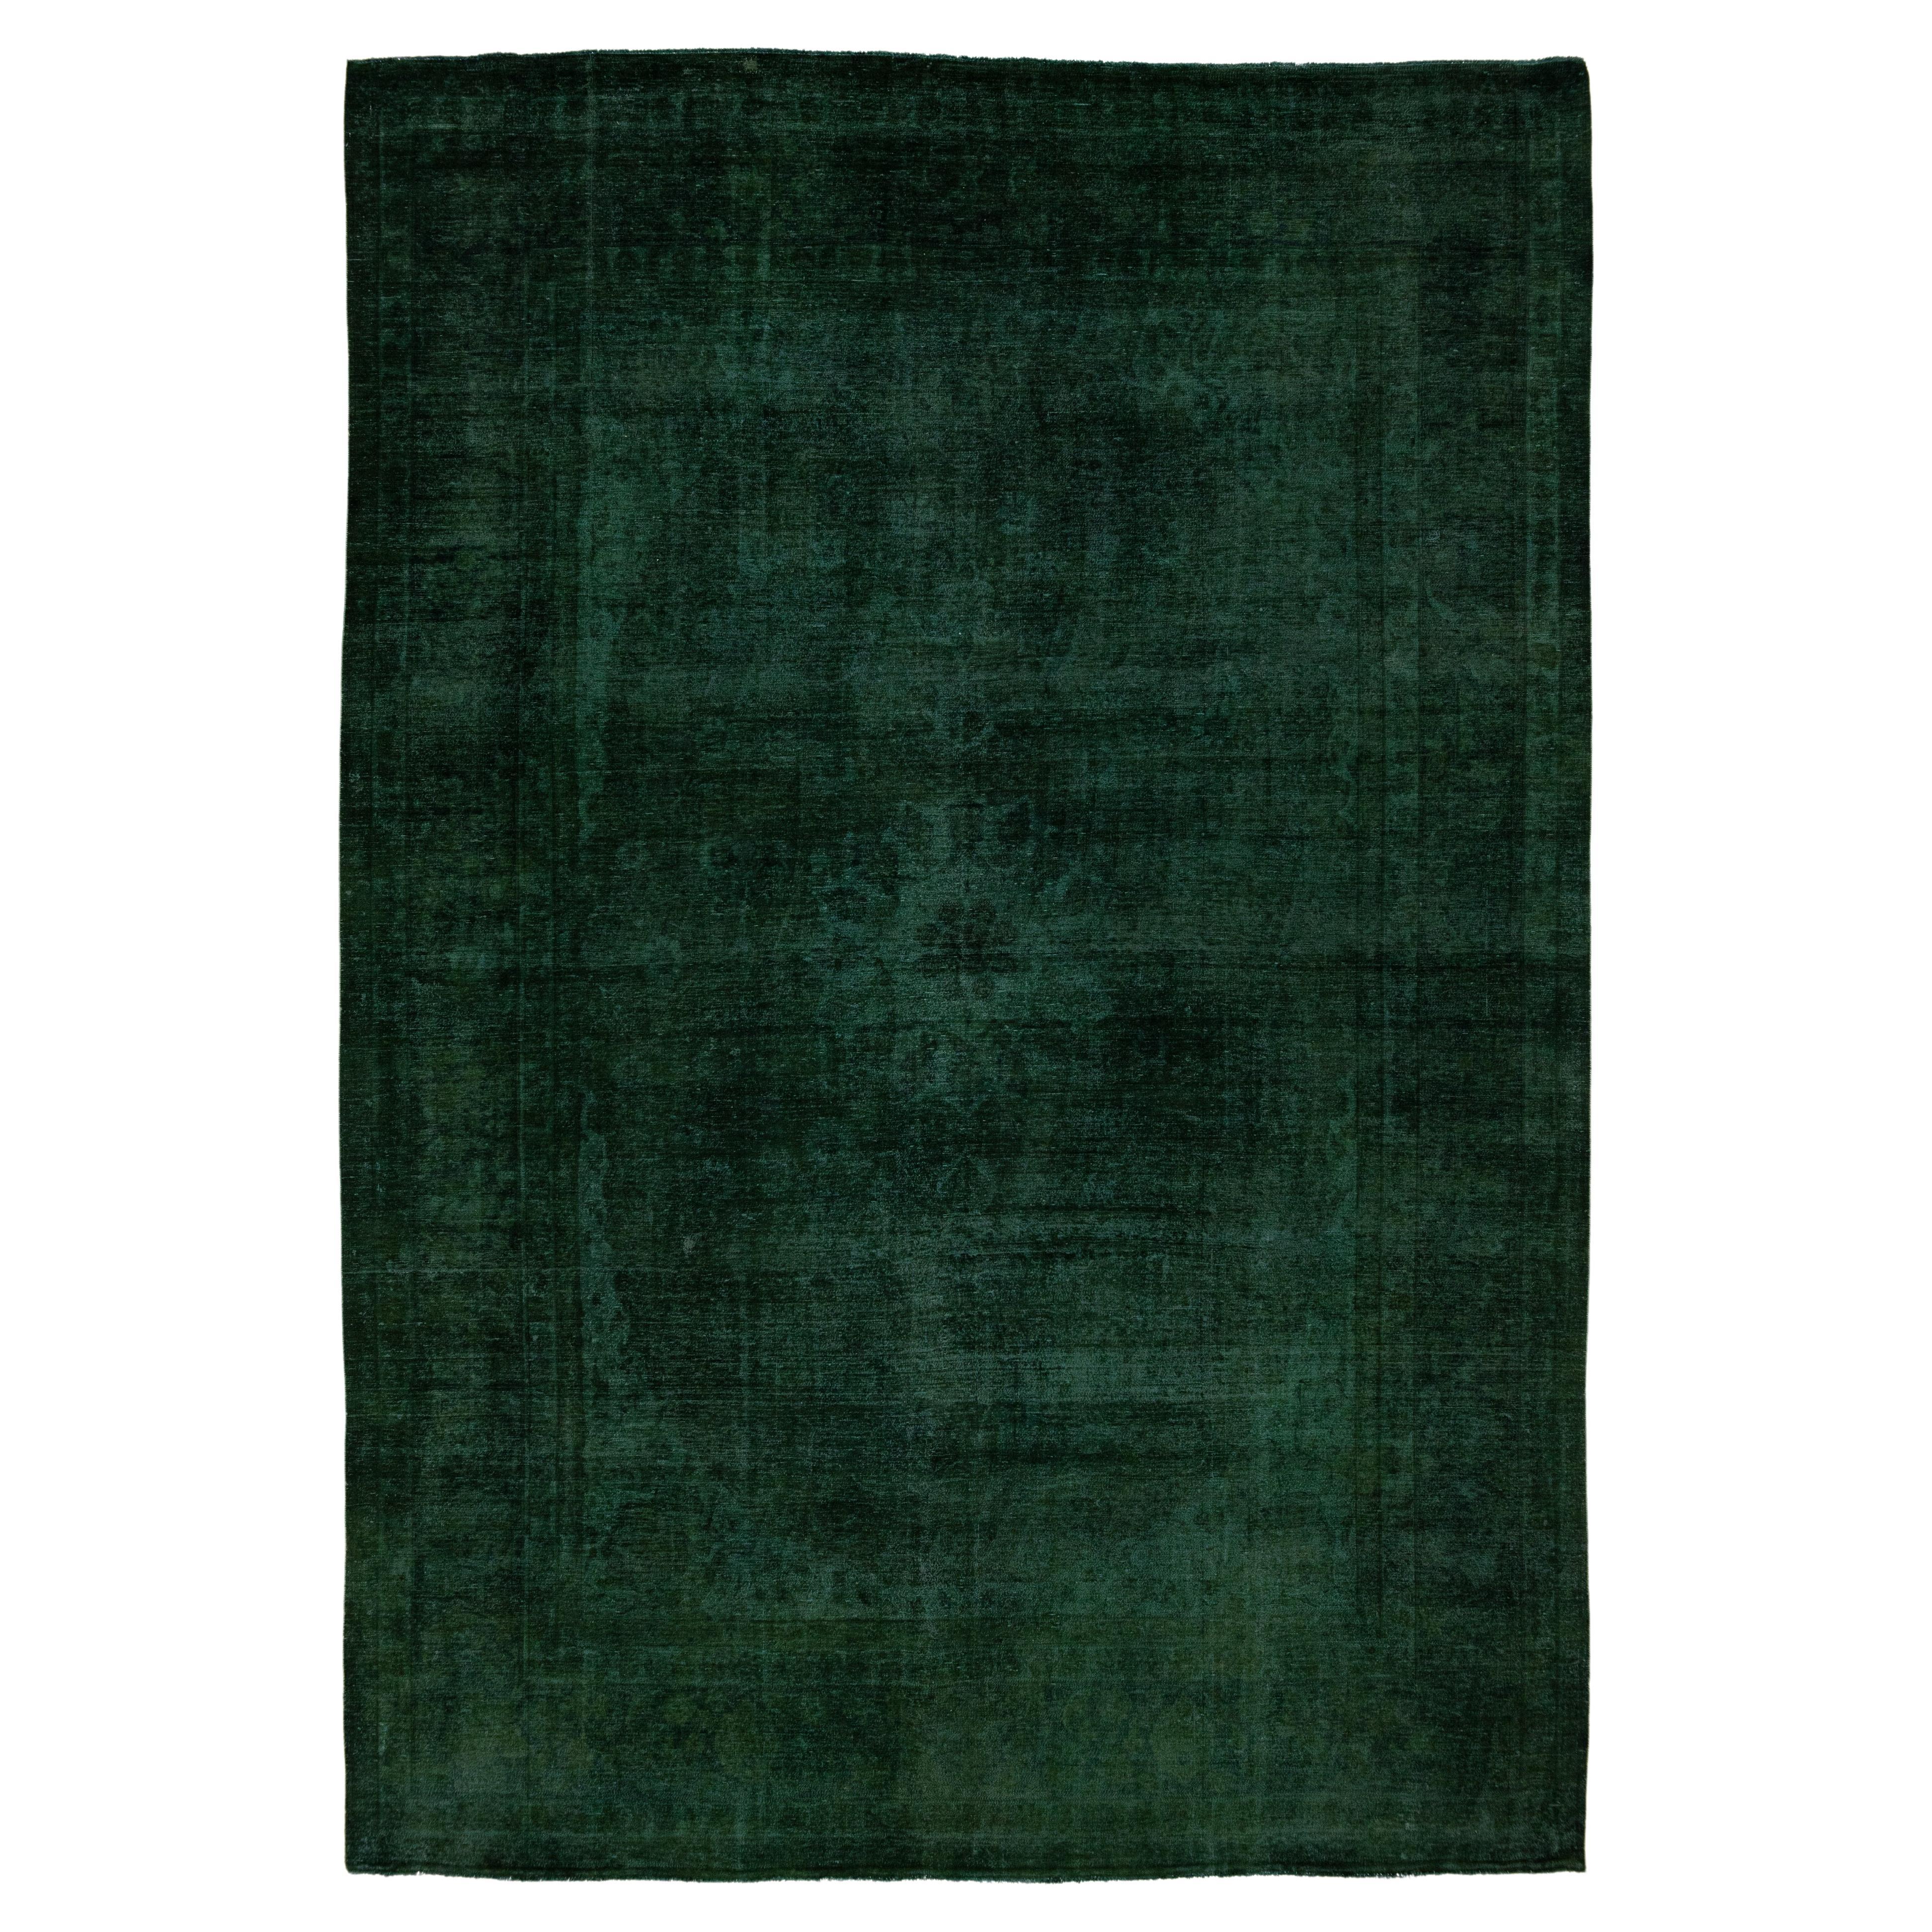  Handmade 1930s Overdyed Persian Designed Wool Rug Oversize In Green For Sale